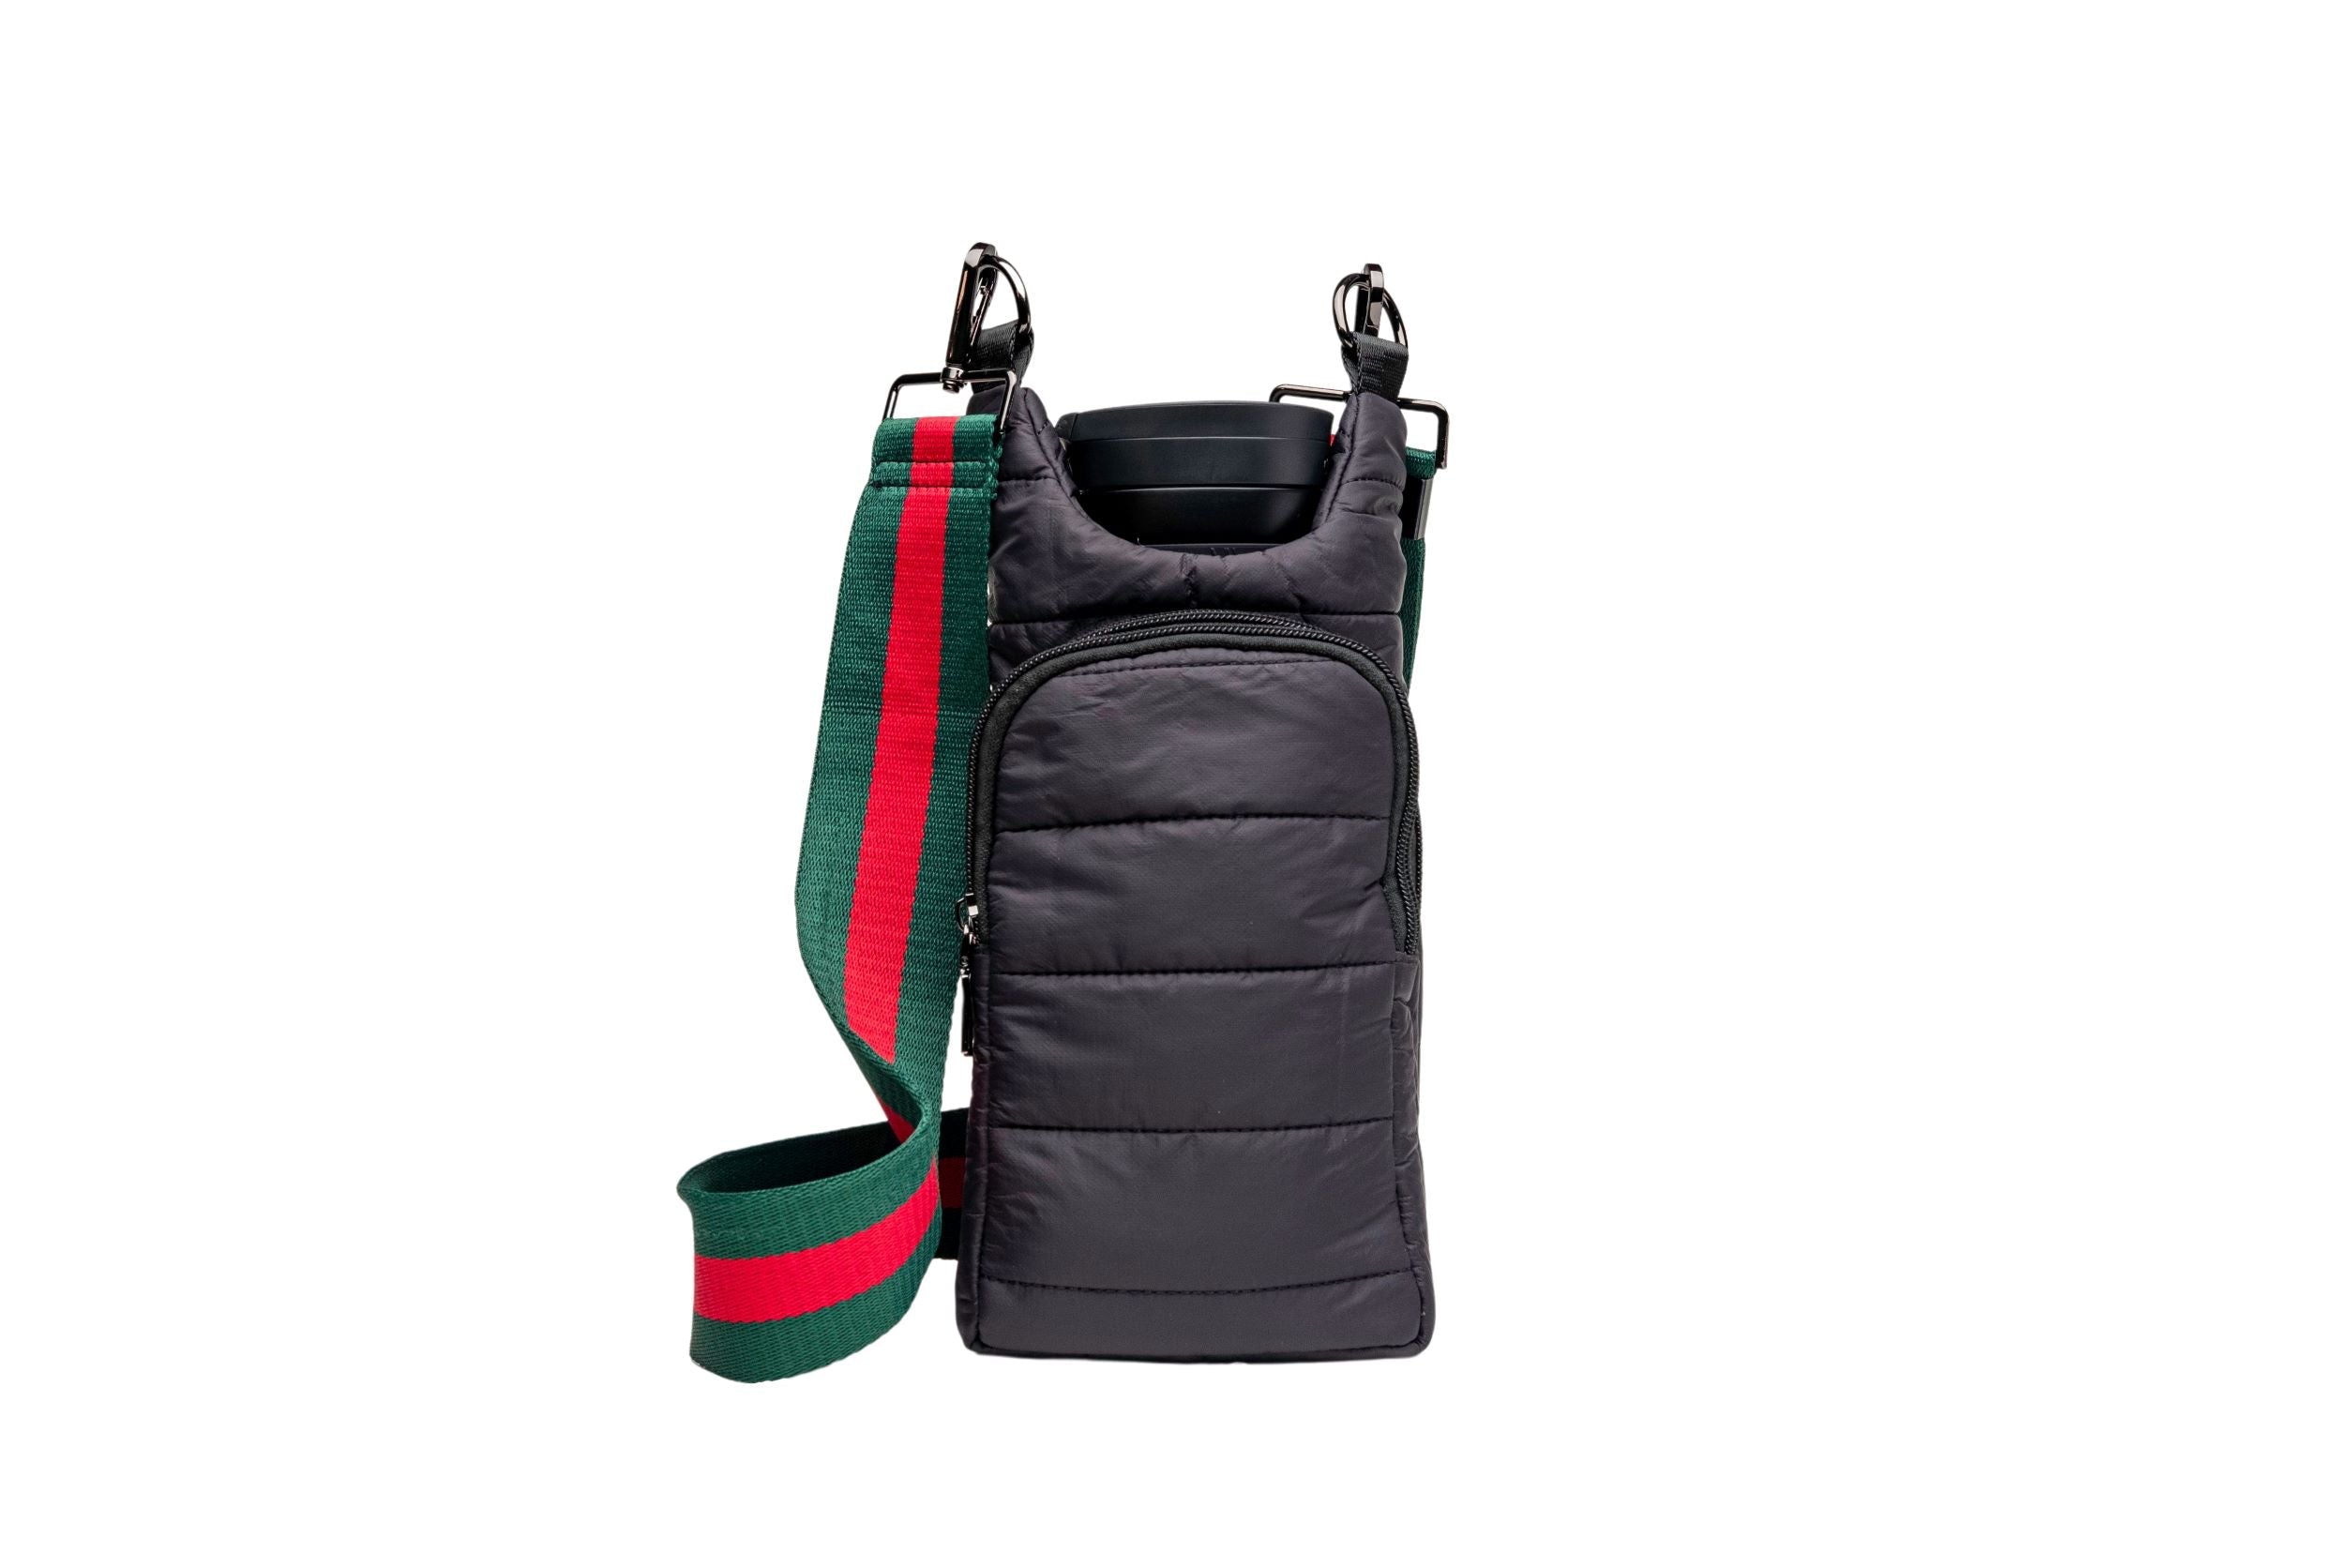 Wholesale - Red and Green Striped Strap with gunmetal hardware